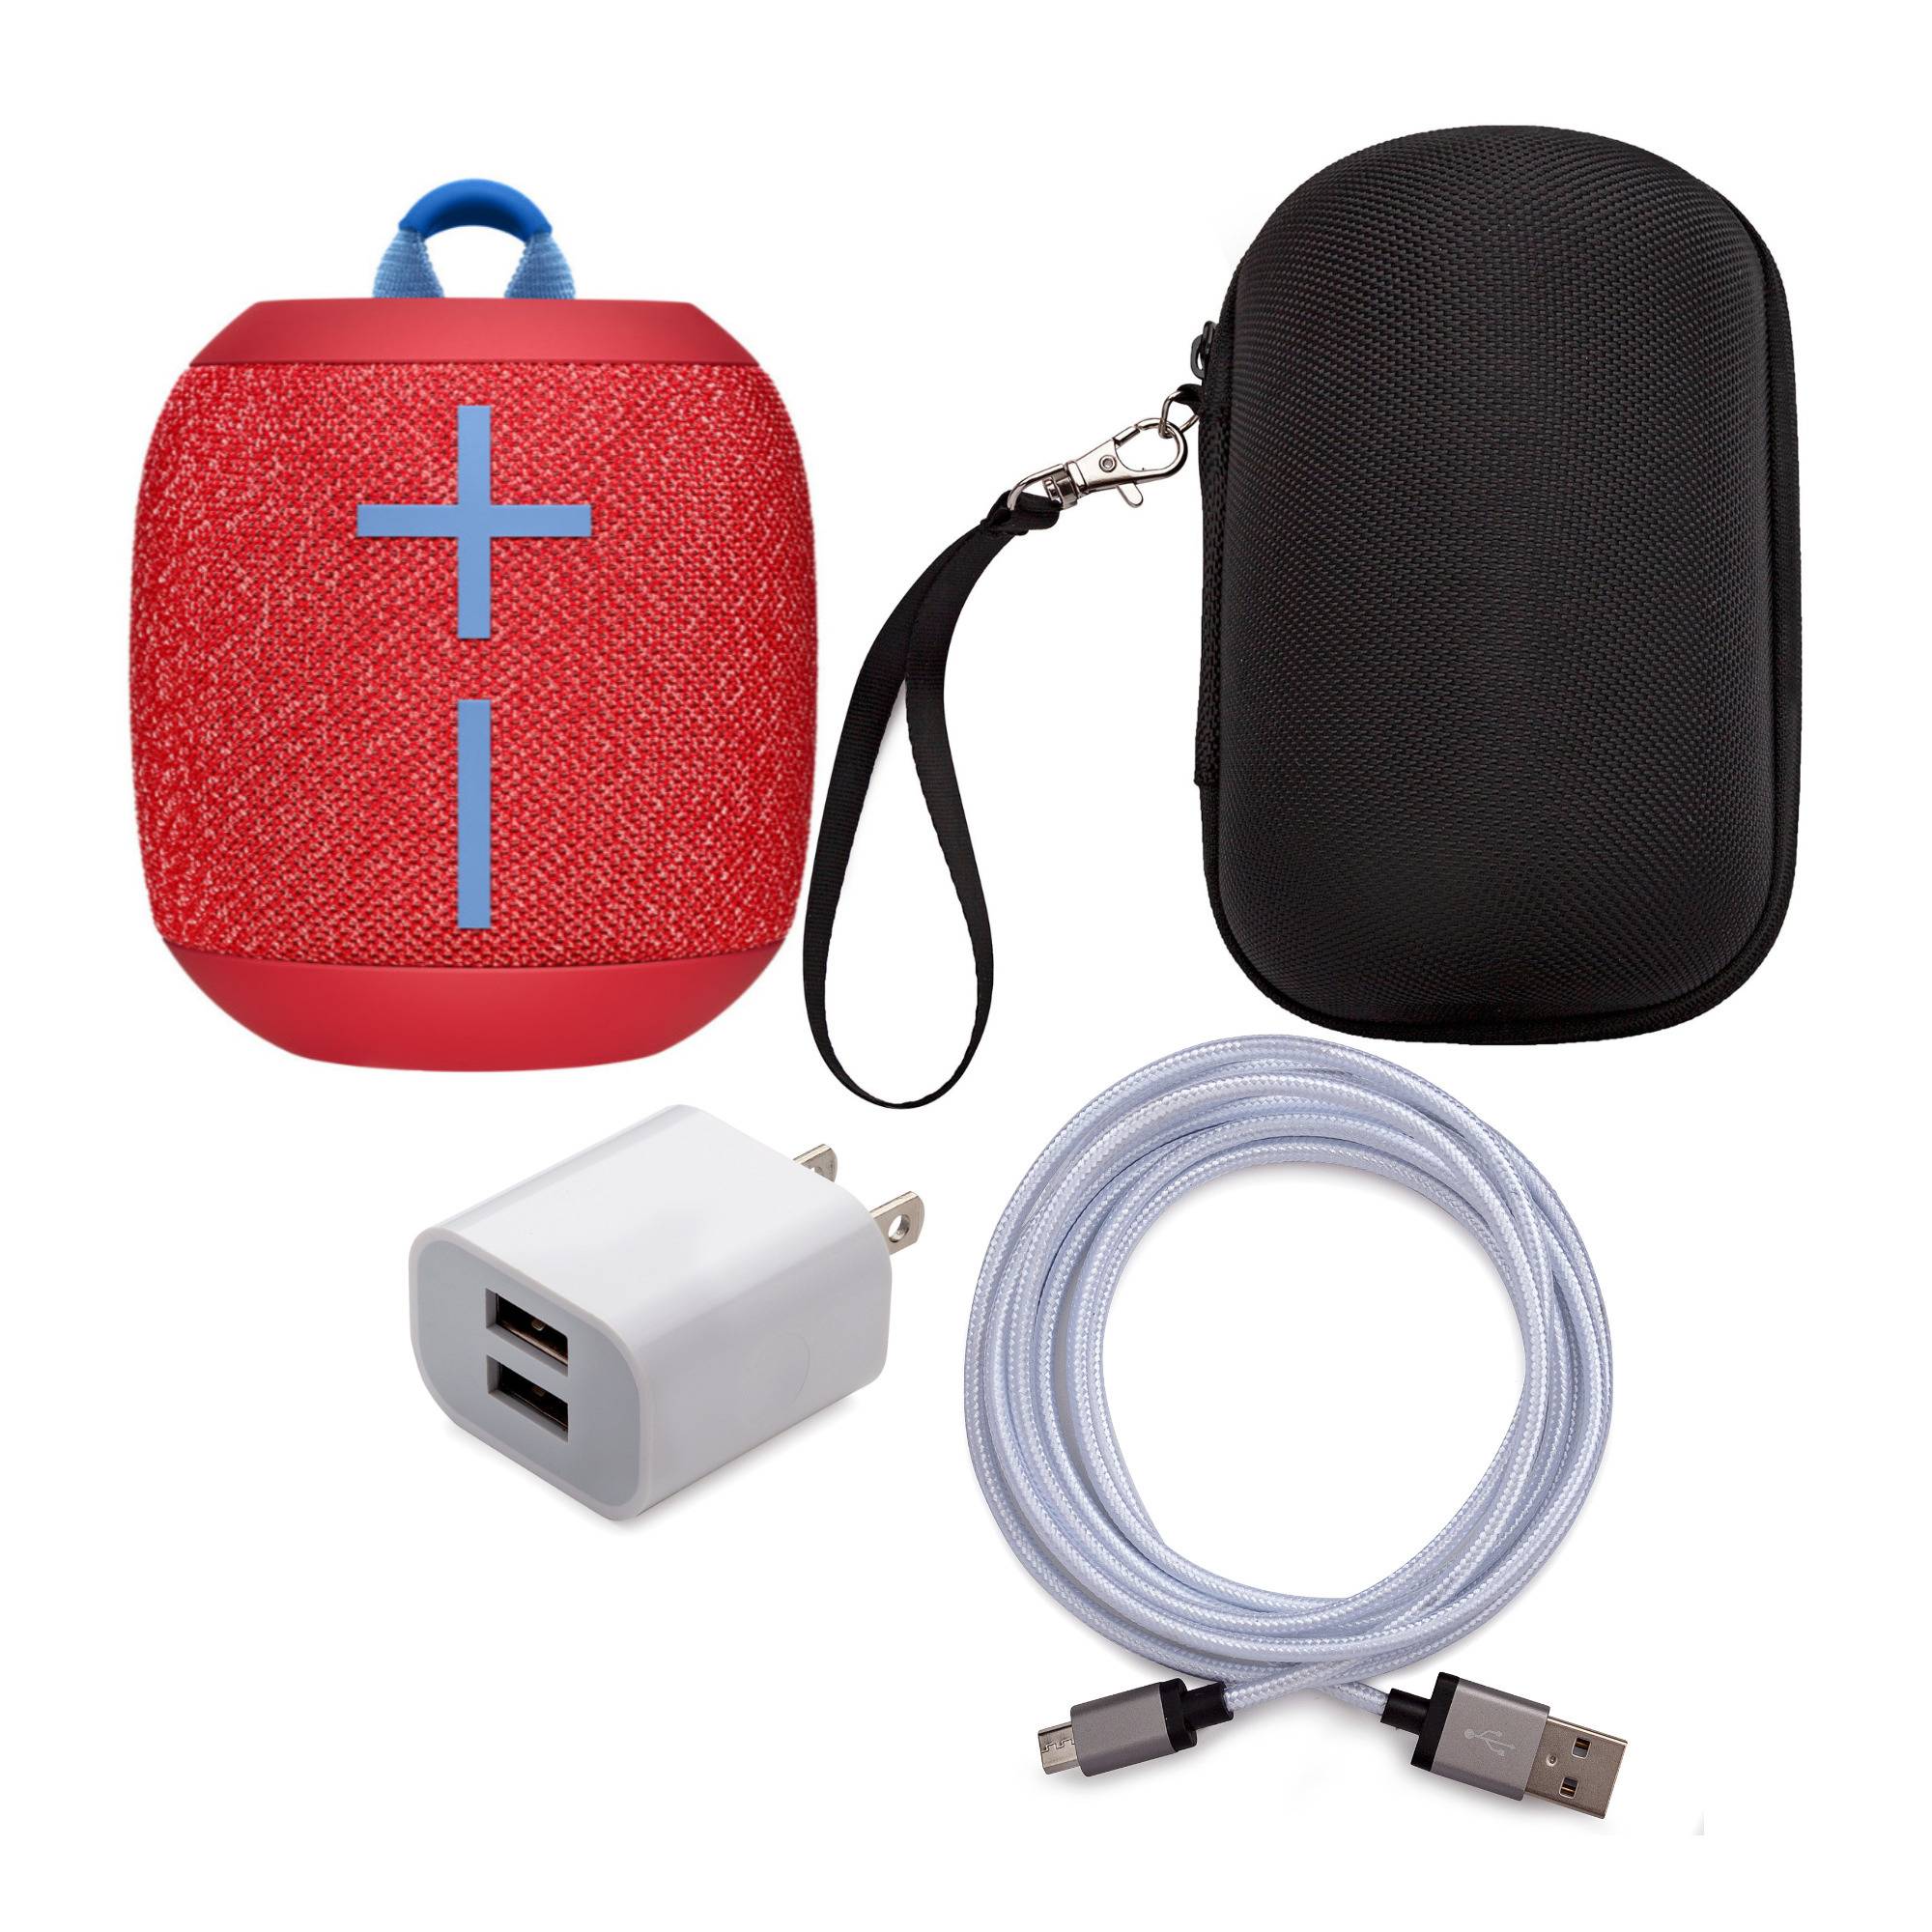 Ultimate Ears WONDERBOOM 2 Bluetooth Speaker (Radical Red) with Knox Case, USB Cable and Adapter